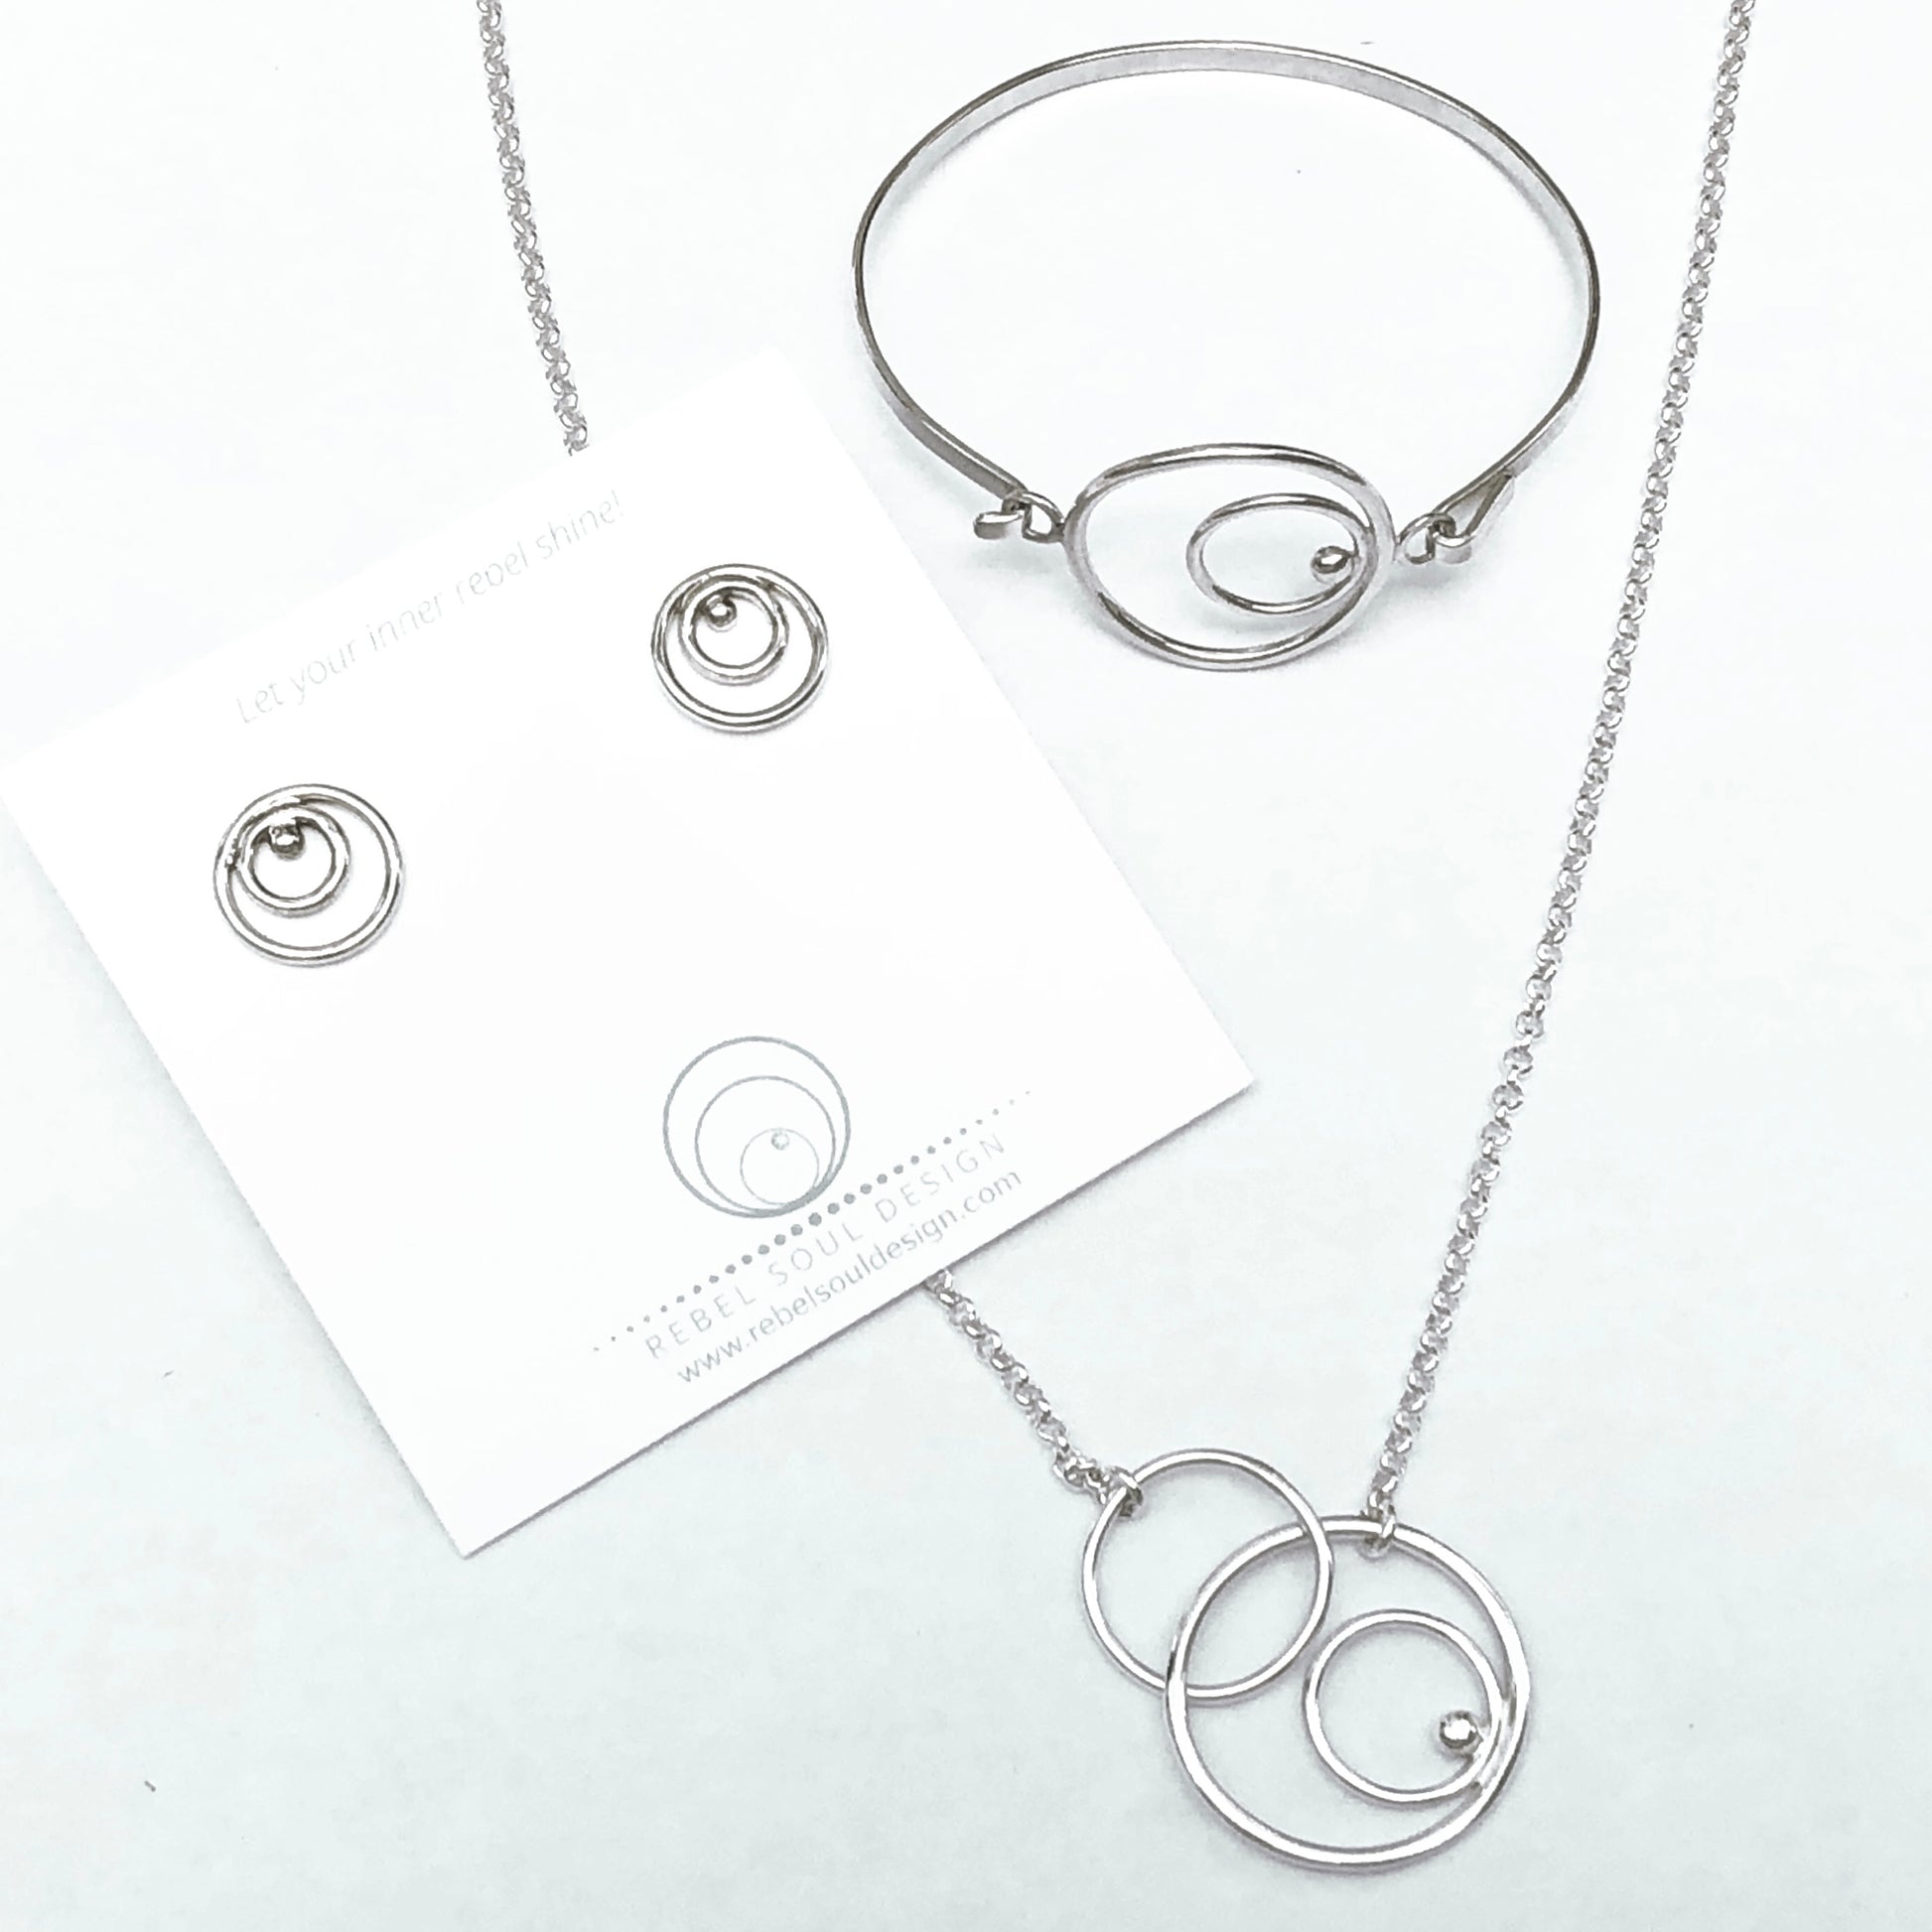 Silver circles stud earrings with coordinating necklace and bracelet